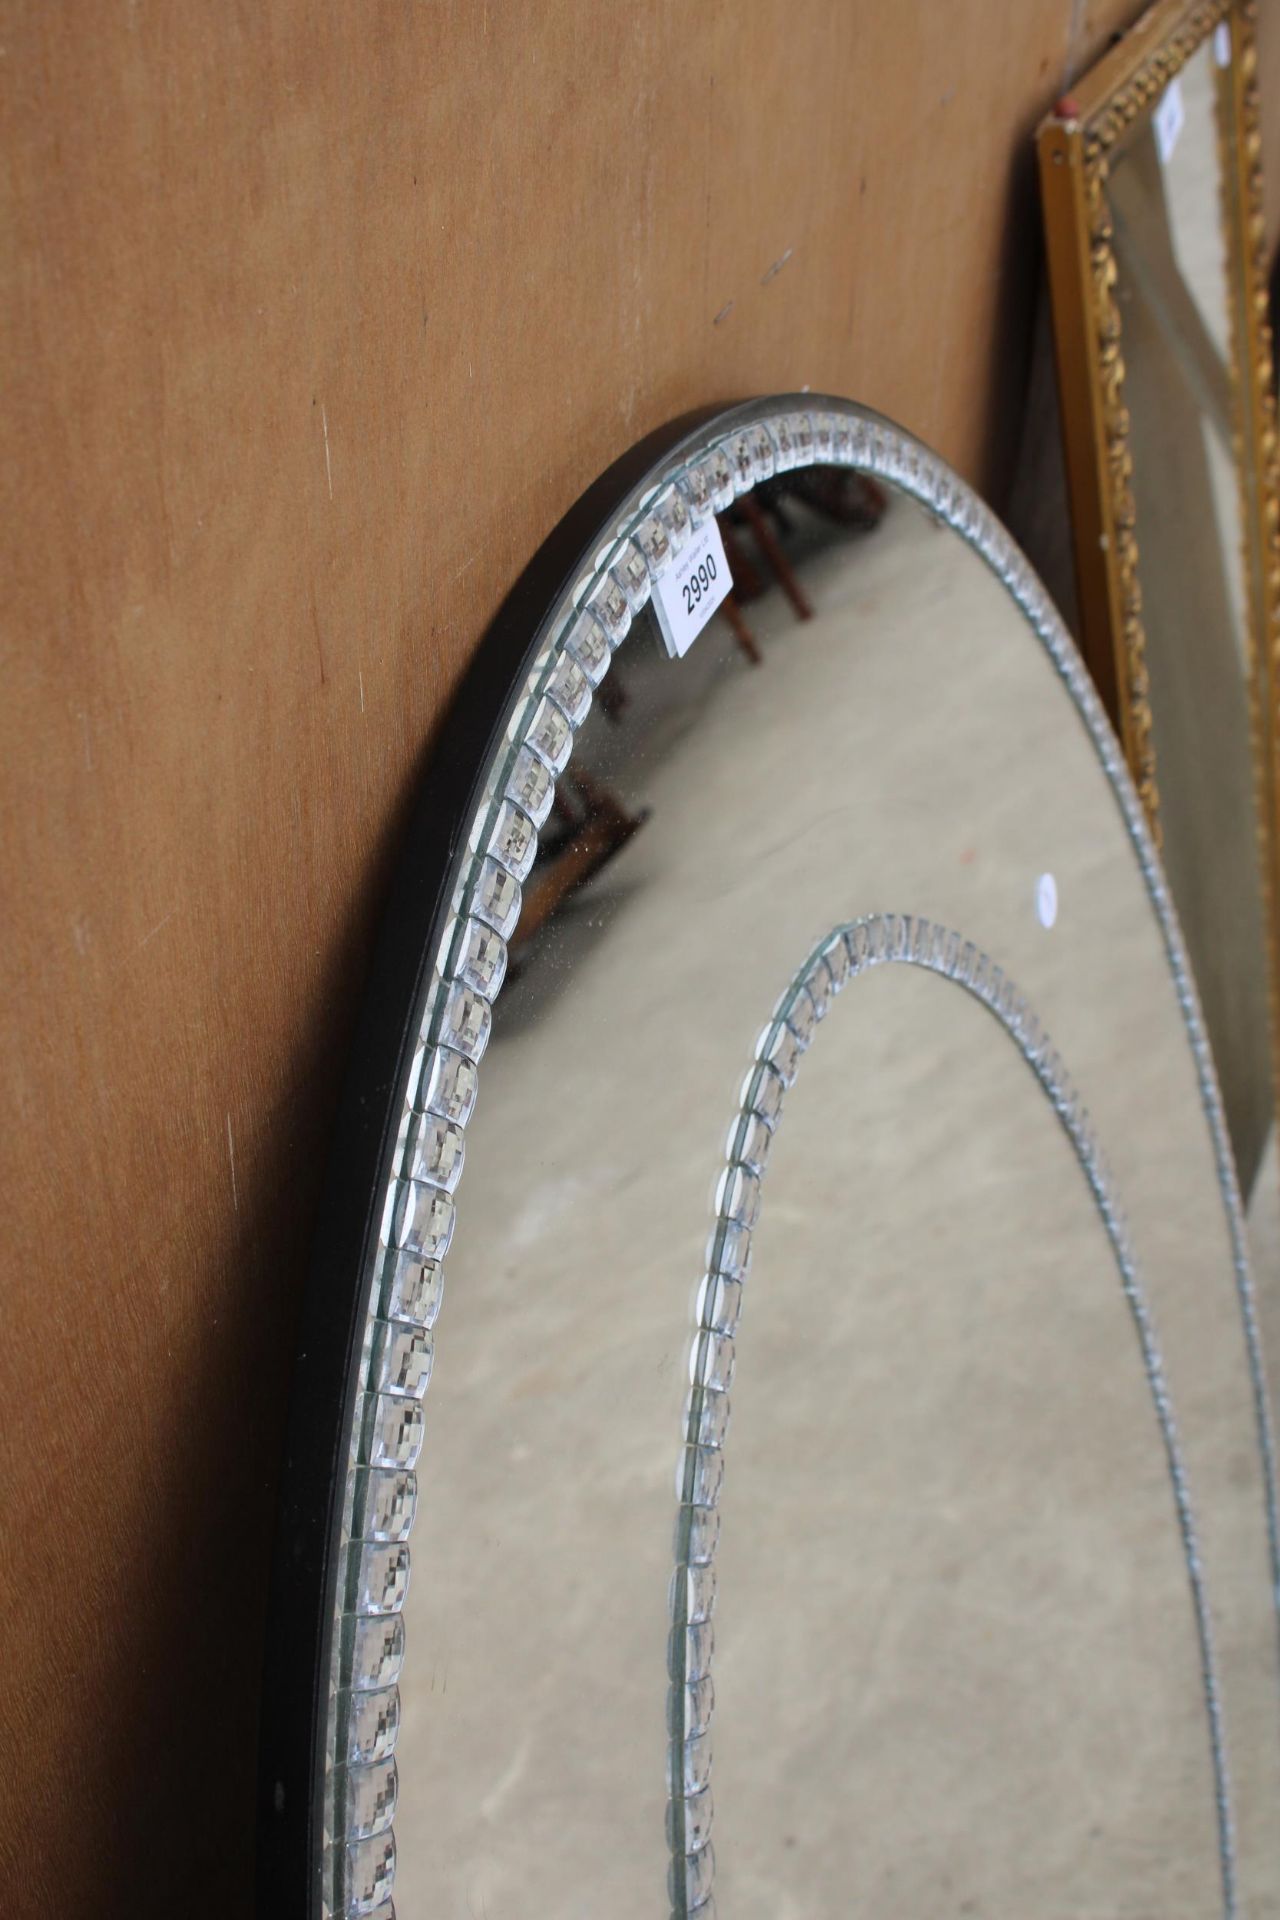 A MODERN OVAL MIRROR WITH TWO ROWS OF DIAMOND EFFECT DECORATIONS, 47" X 32" - Bild 3 aus 3